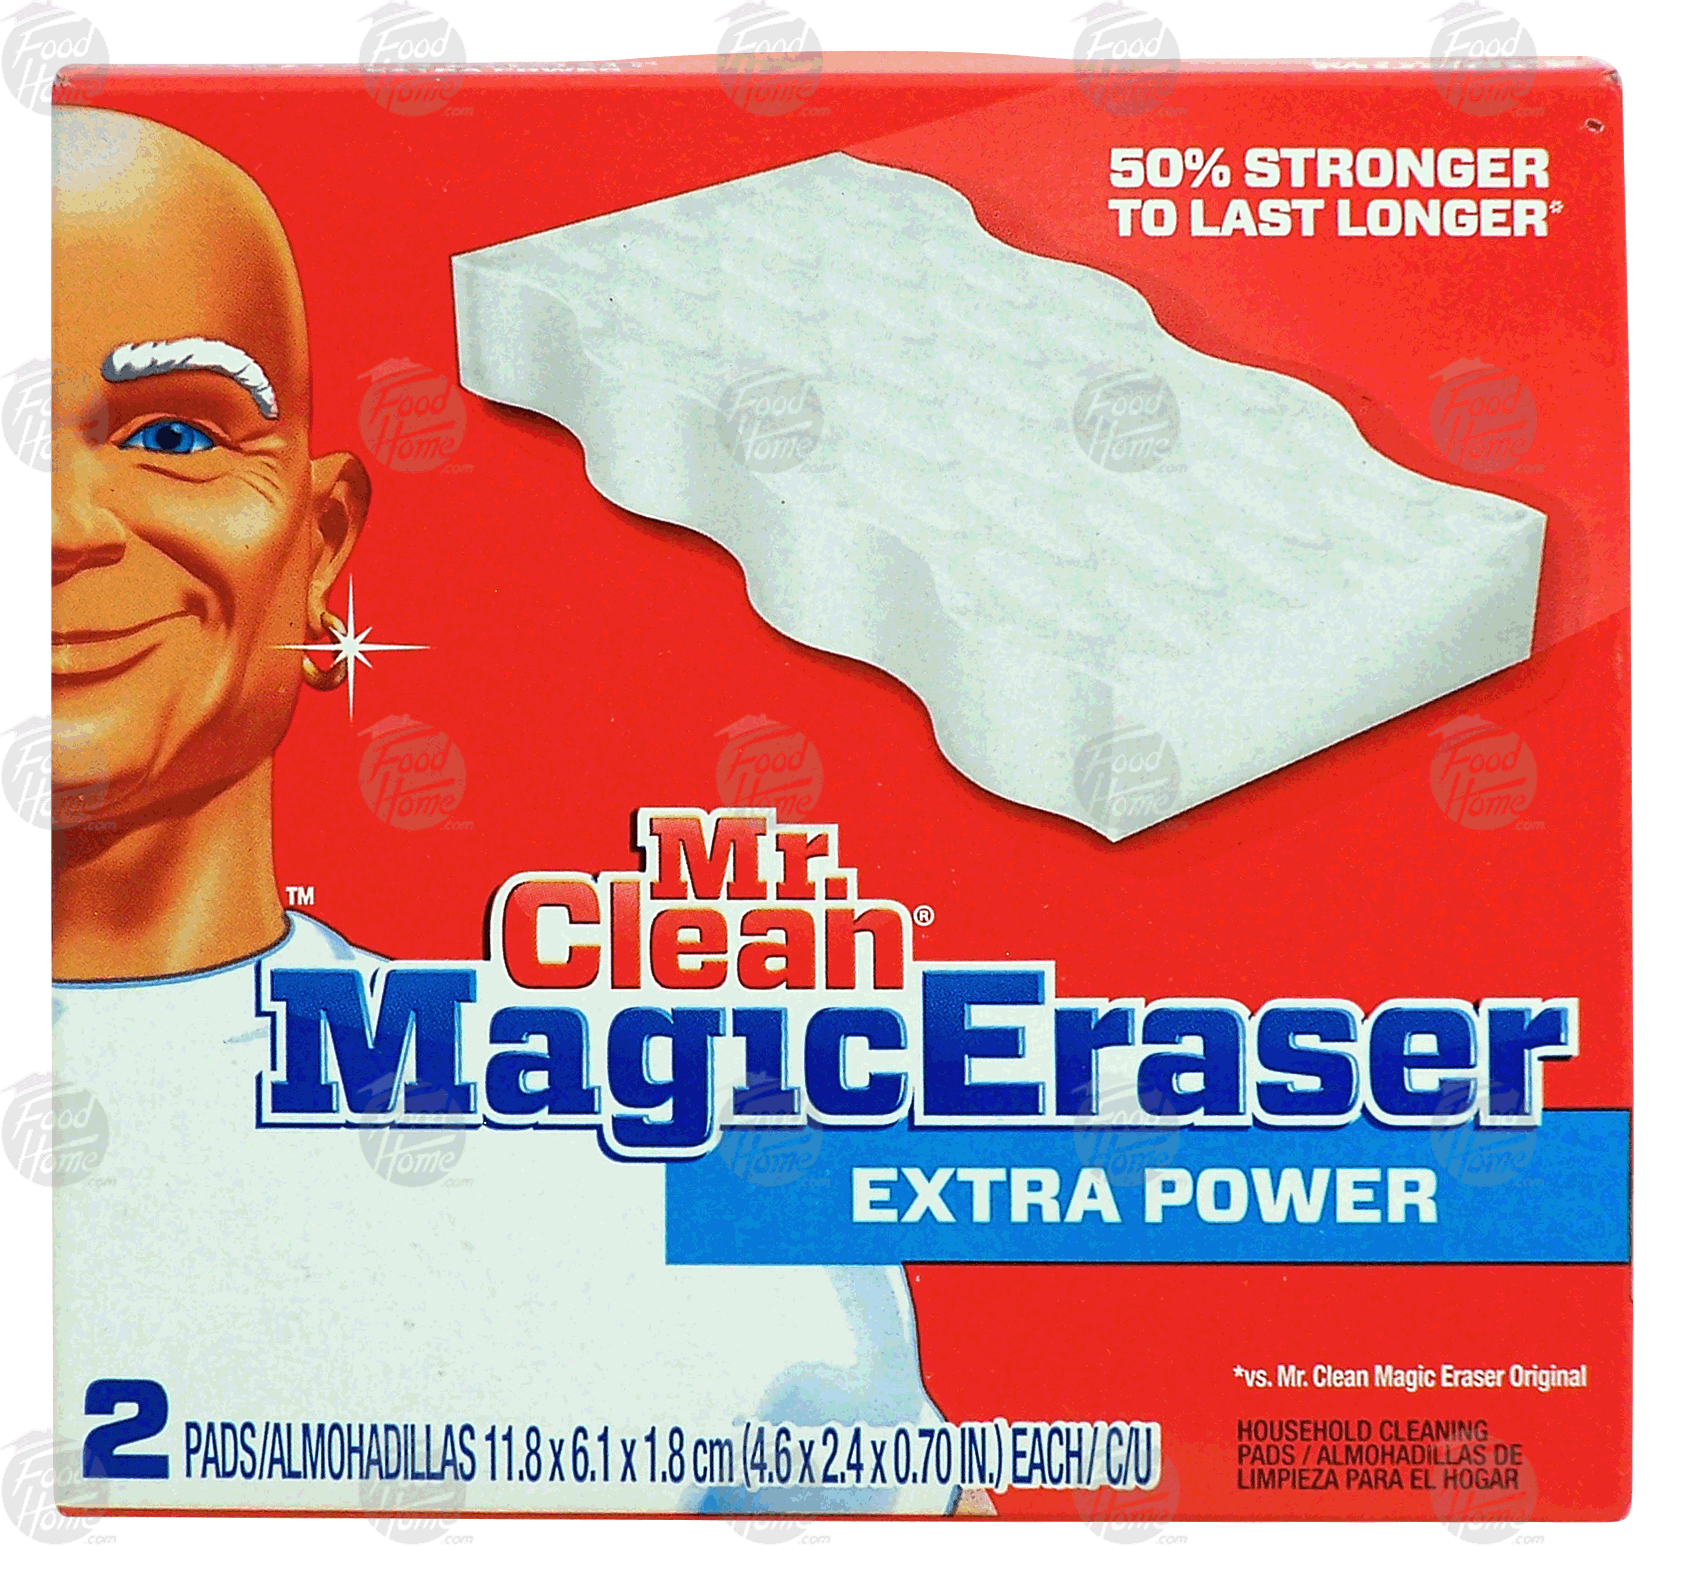 Mr. Clean Magic Eraser extra power household cleaning pads Full-Size Picture